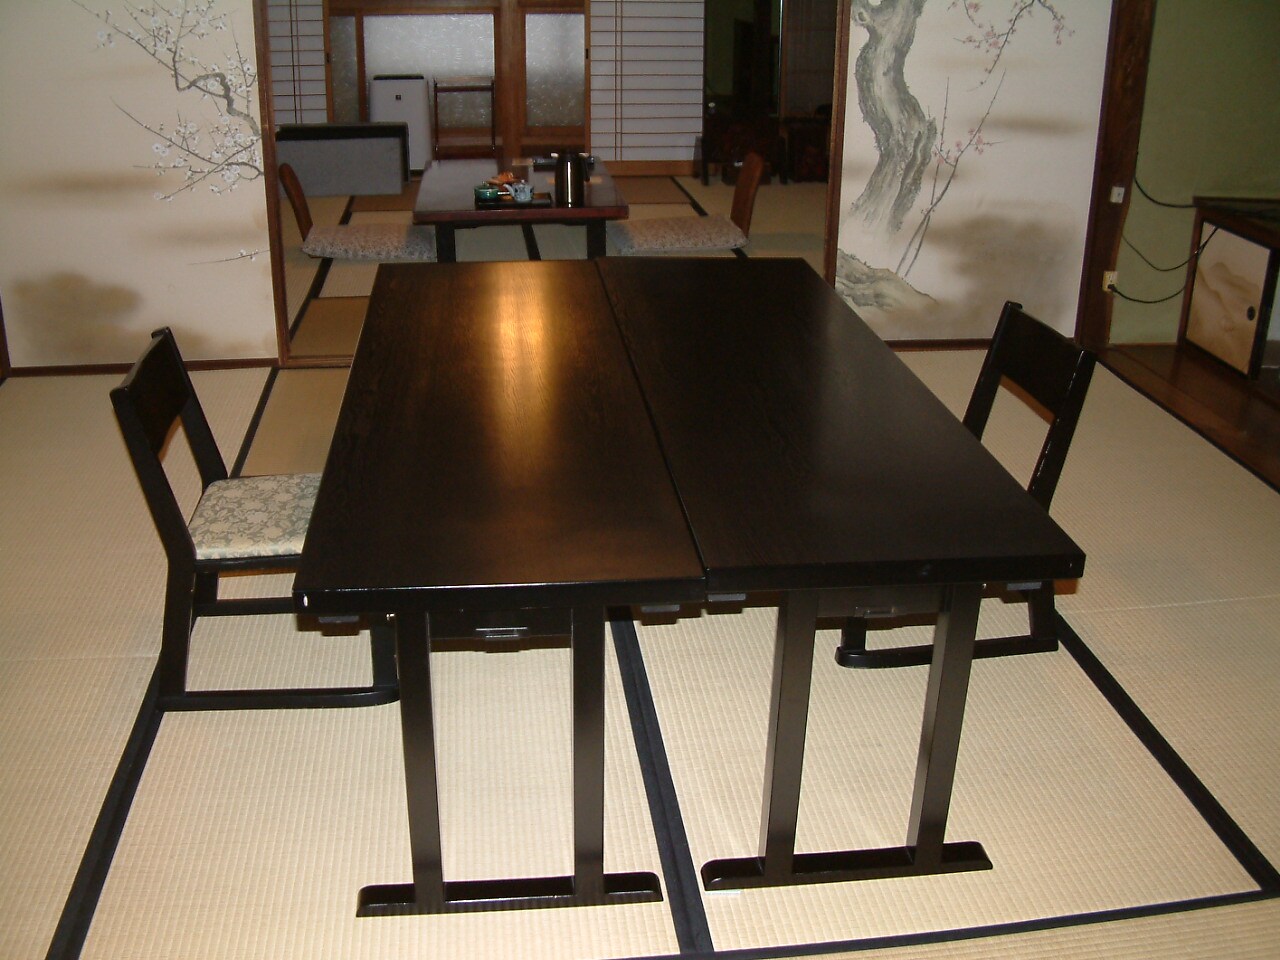 An example of a dining room